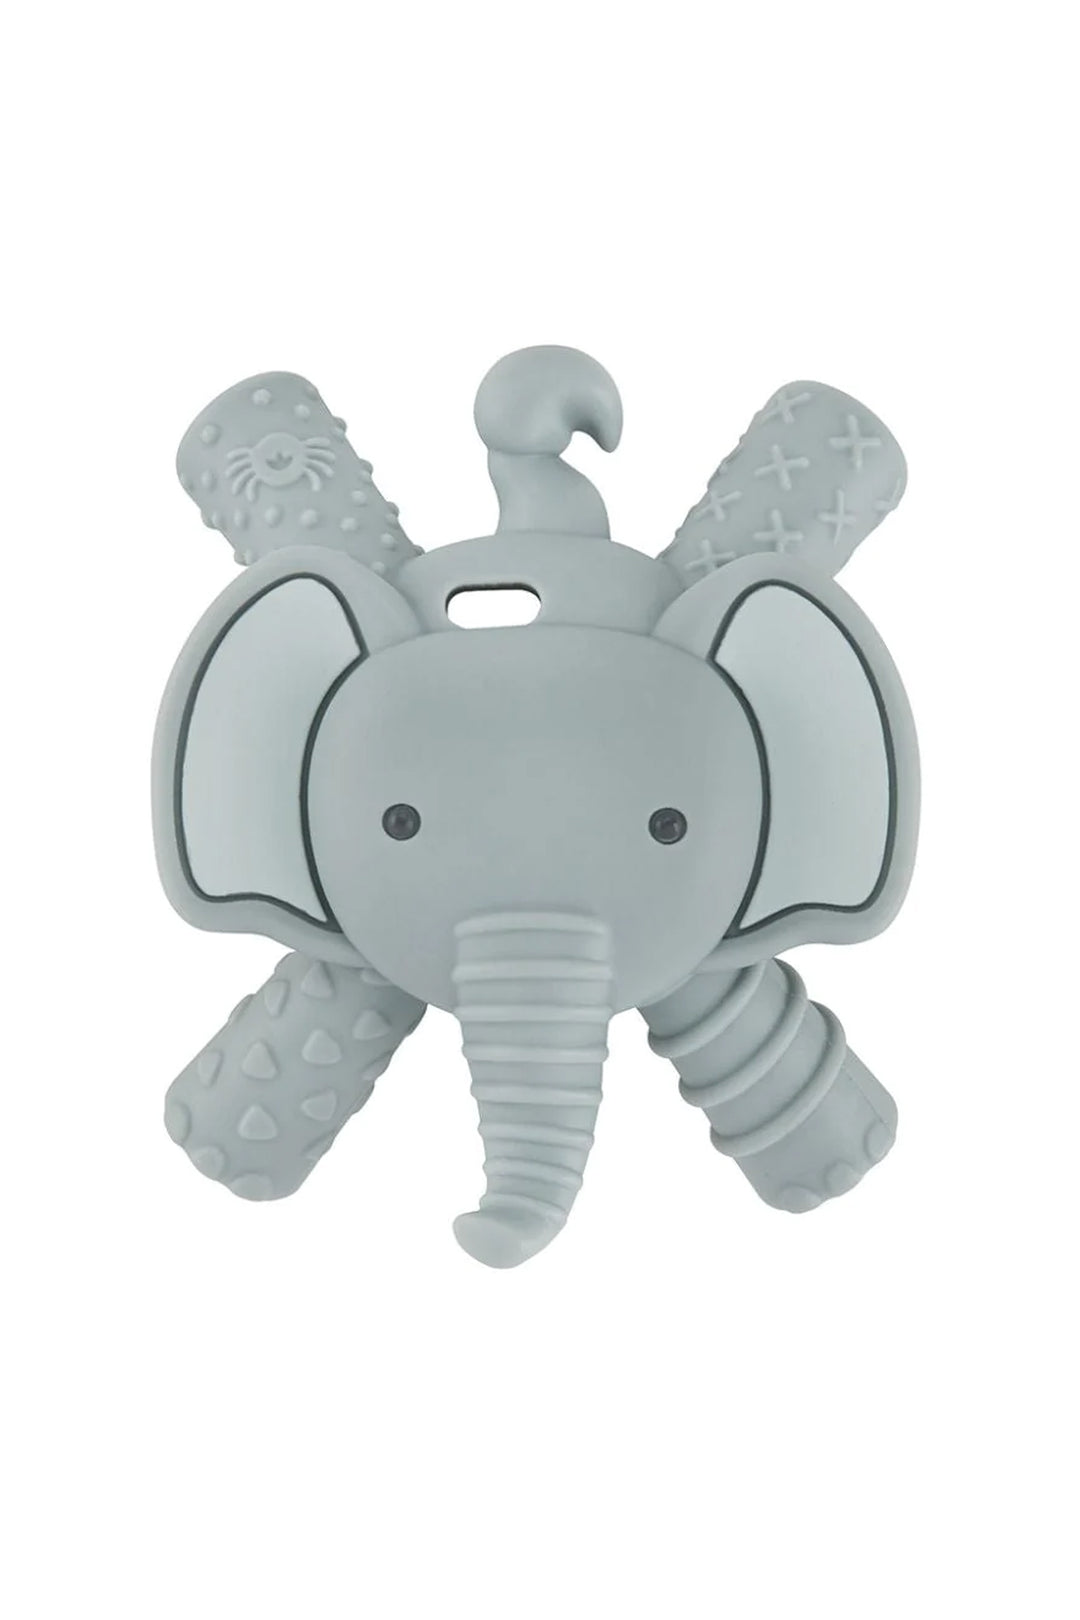 Teether - Emmerson the Elephant